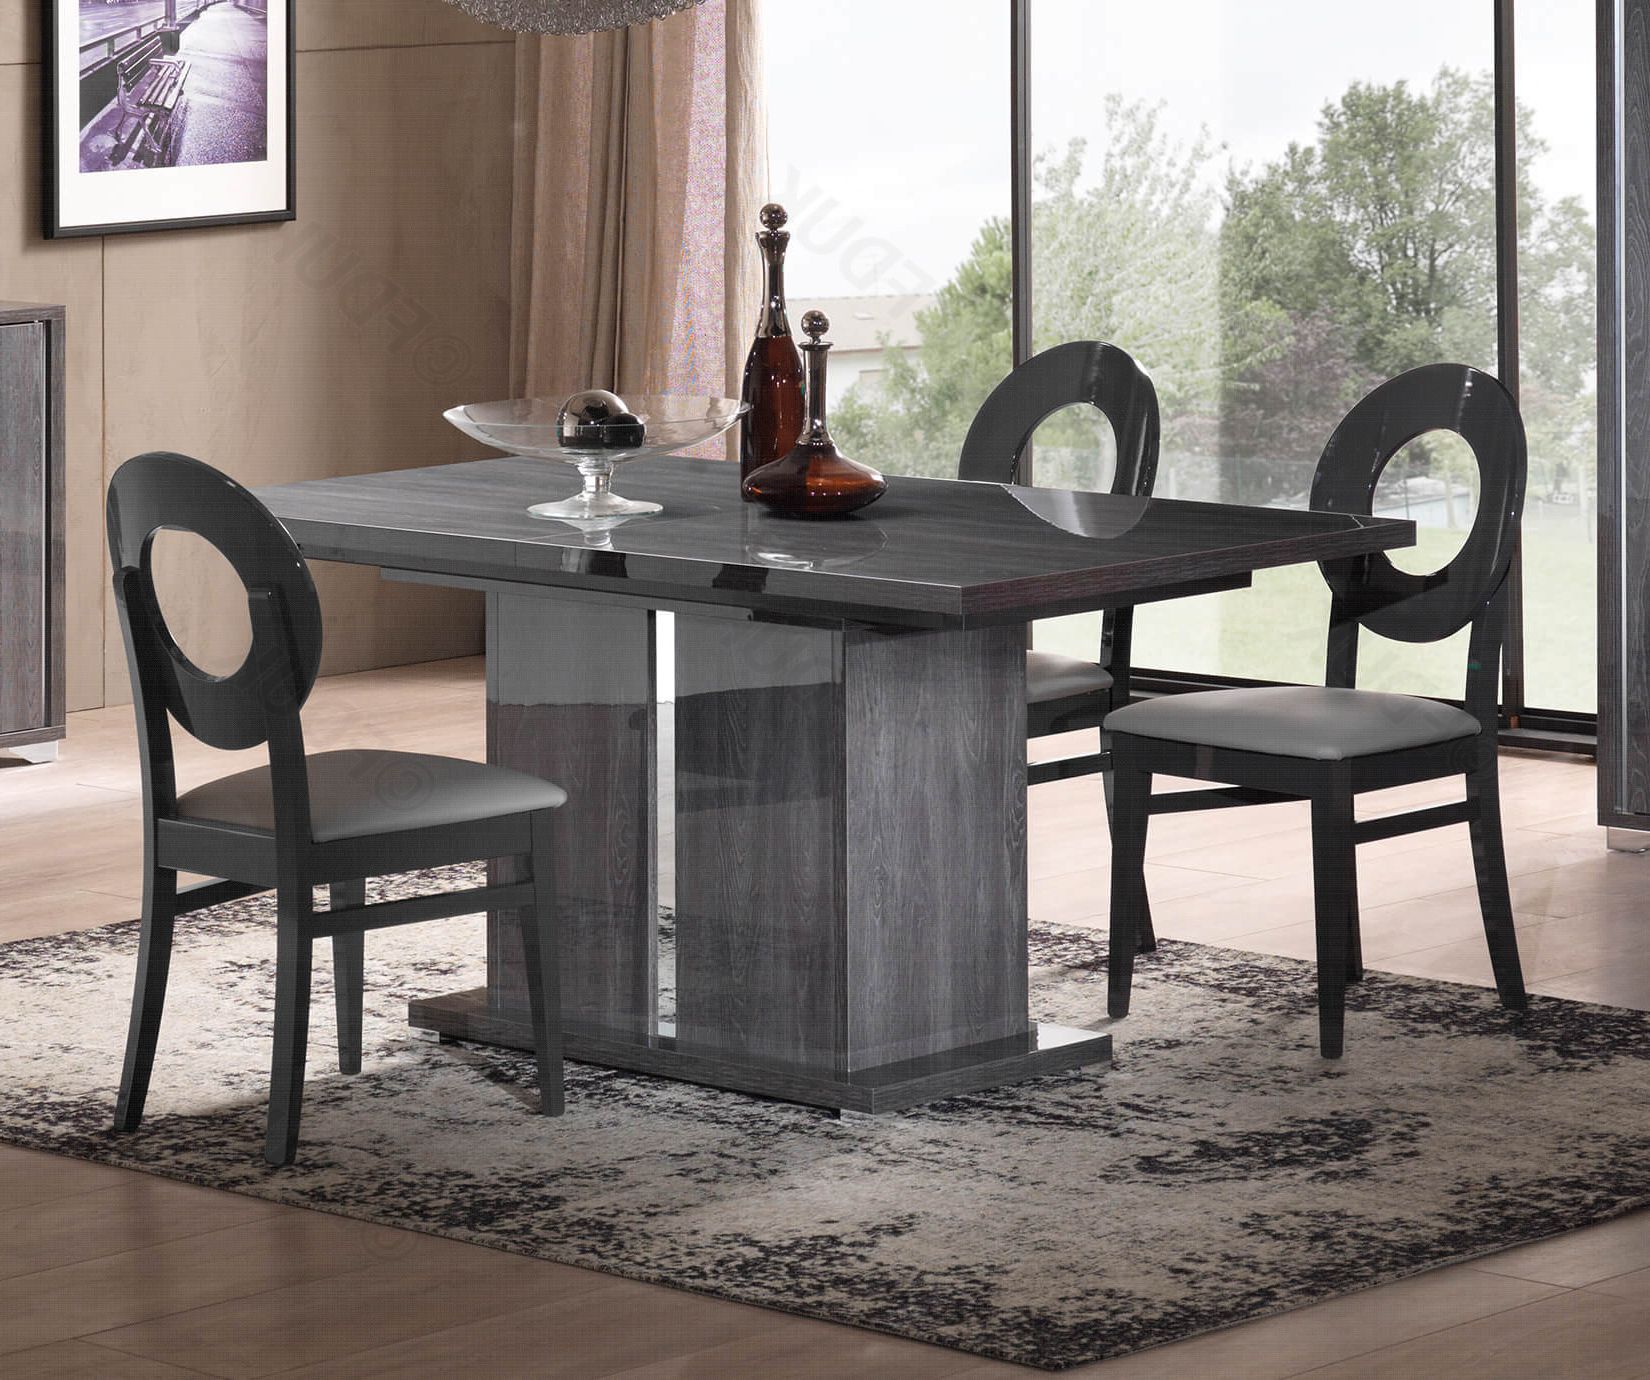 Popular Martino Dining Tables In San Martino Armony Rectangular Extension Dining Table With 6 Oval Dining  Chair (View 2 of 25)